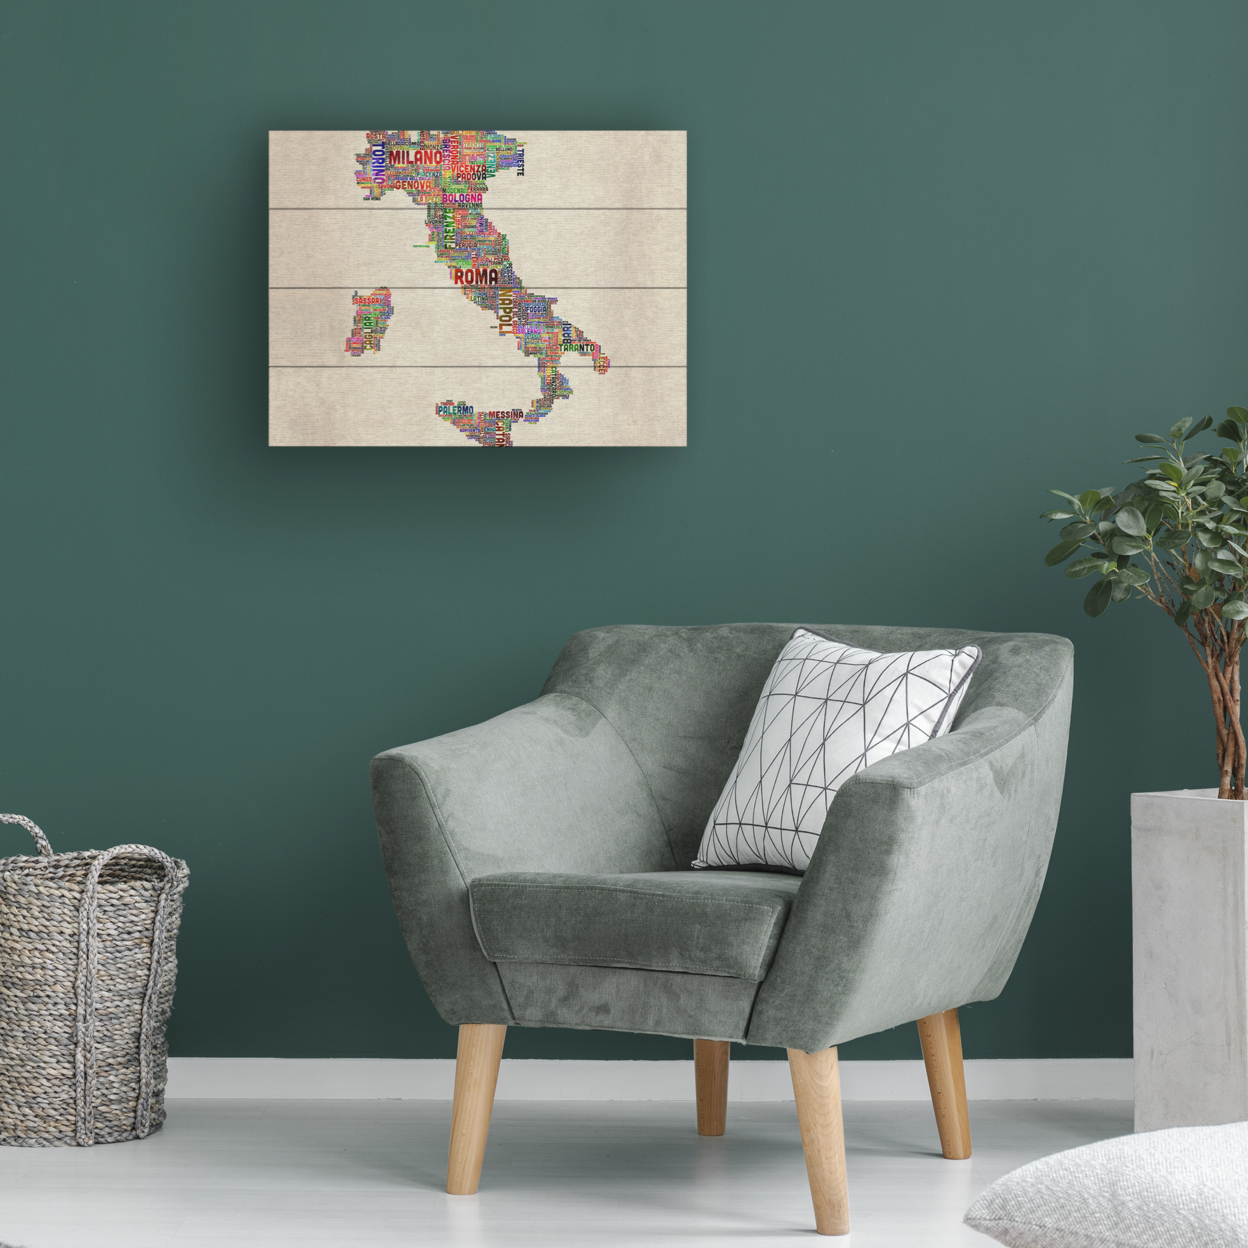 Wall Art 12 X 16 Inches Titled Italy II Ready To Hang Printed On Wooden Planks